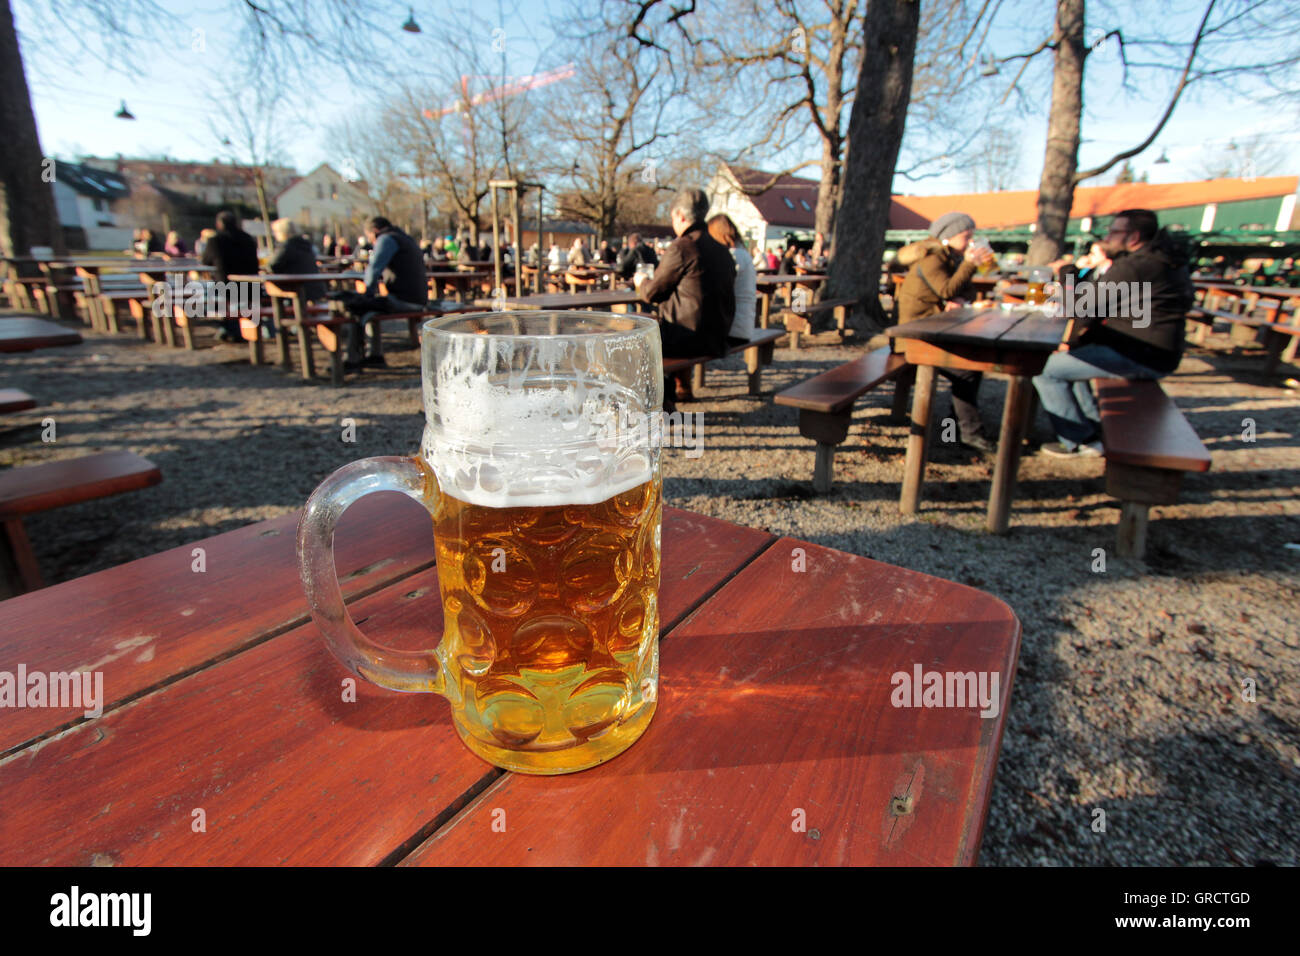 Beer On A Table In A Biergarten During Spring-Like Temperatures At Christmas In Munich Stock Photo